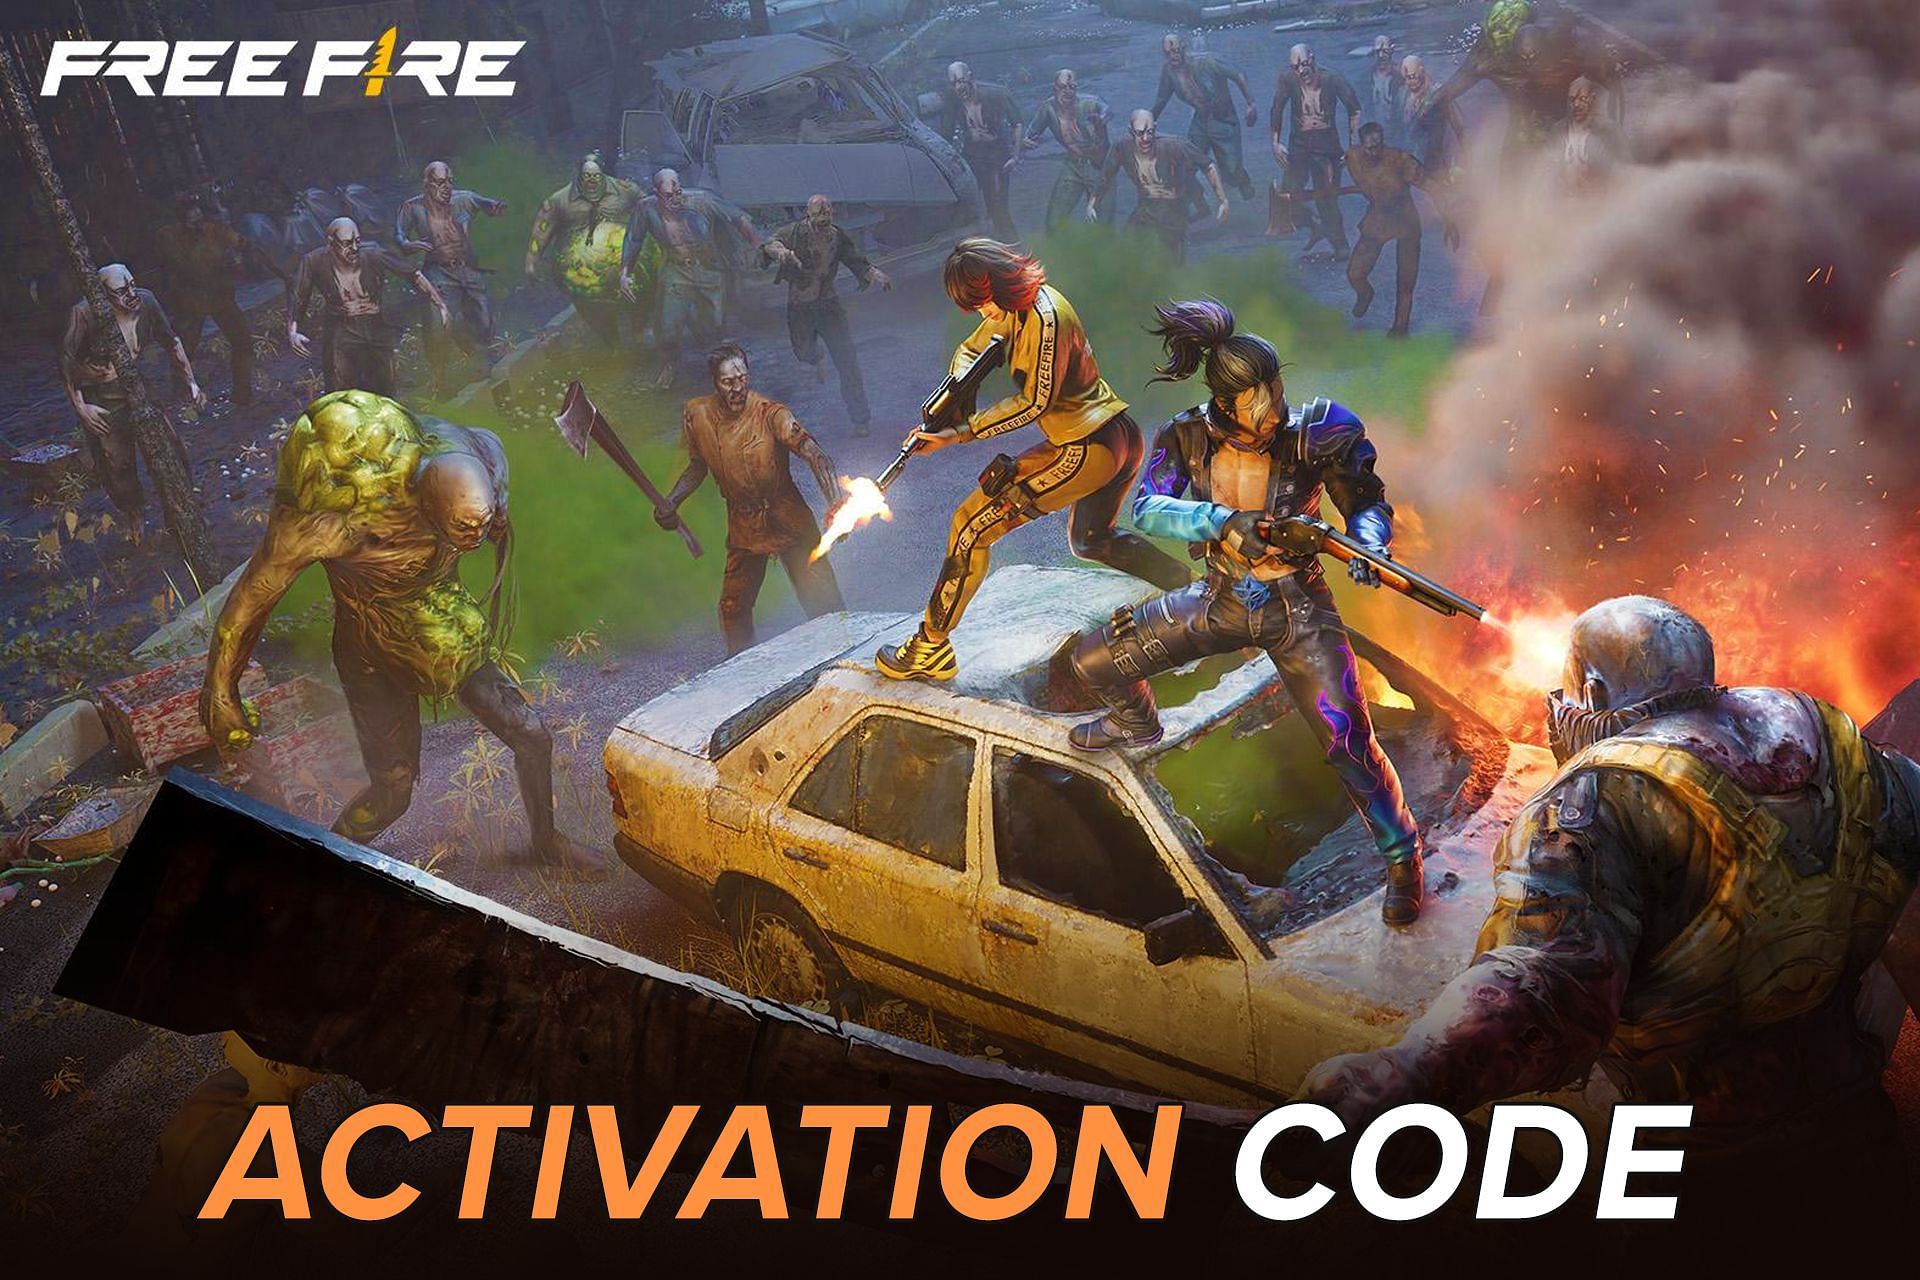 How to get Activation Code to access Free Fire Advance Server?